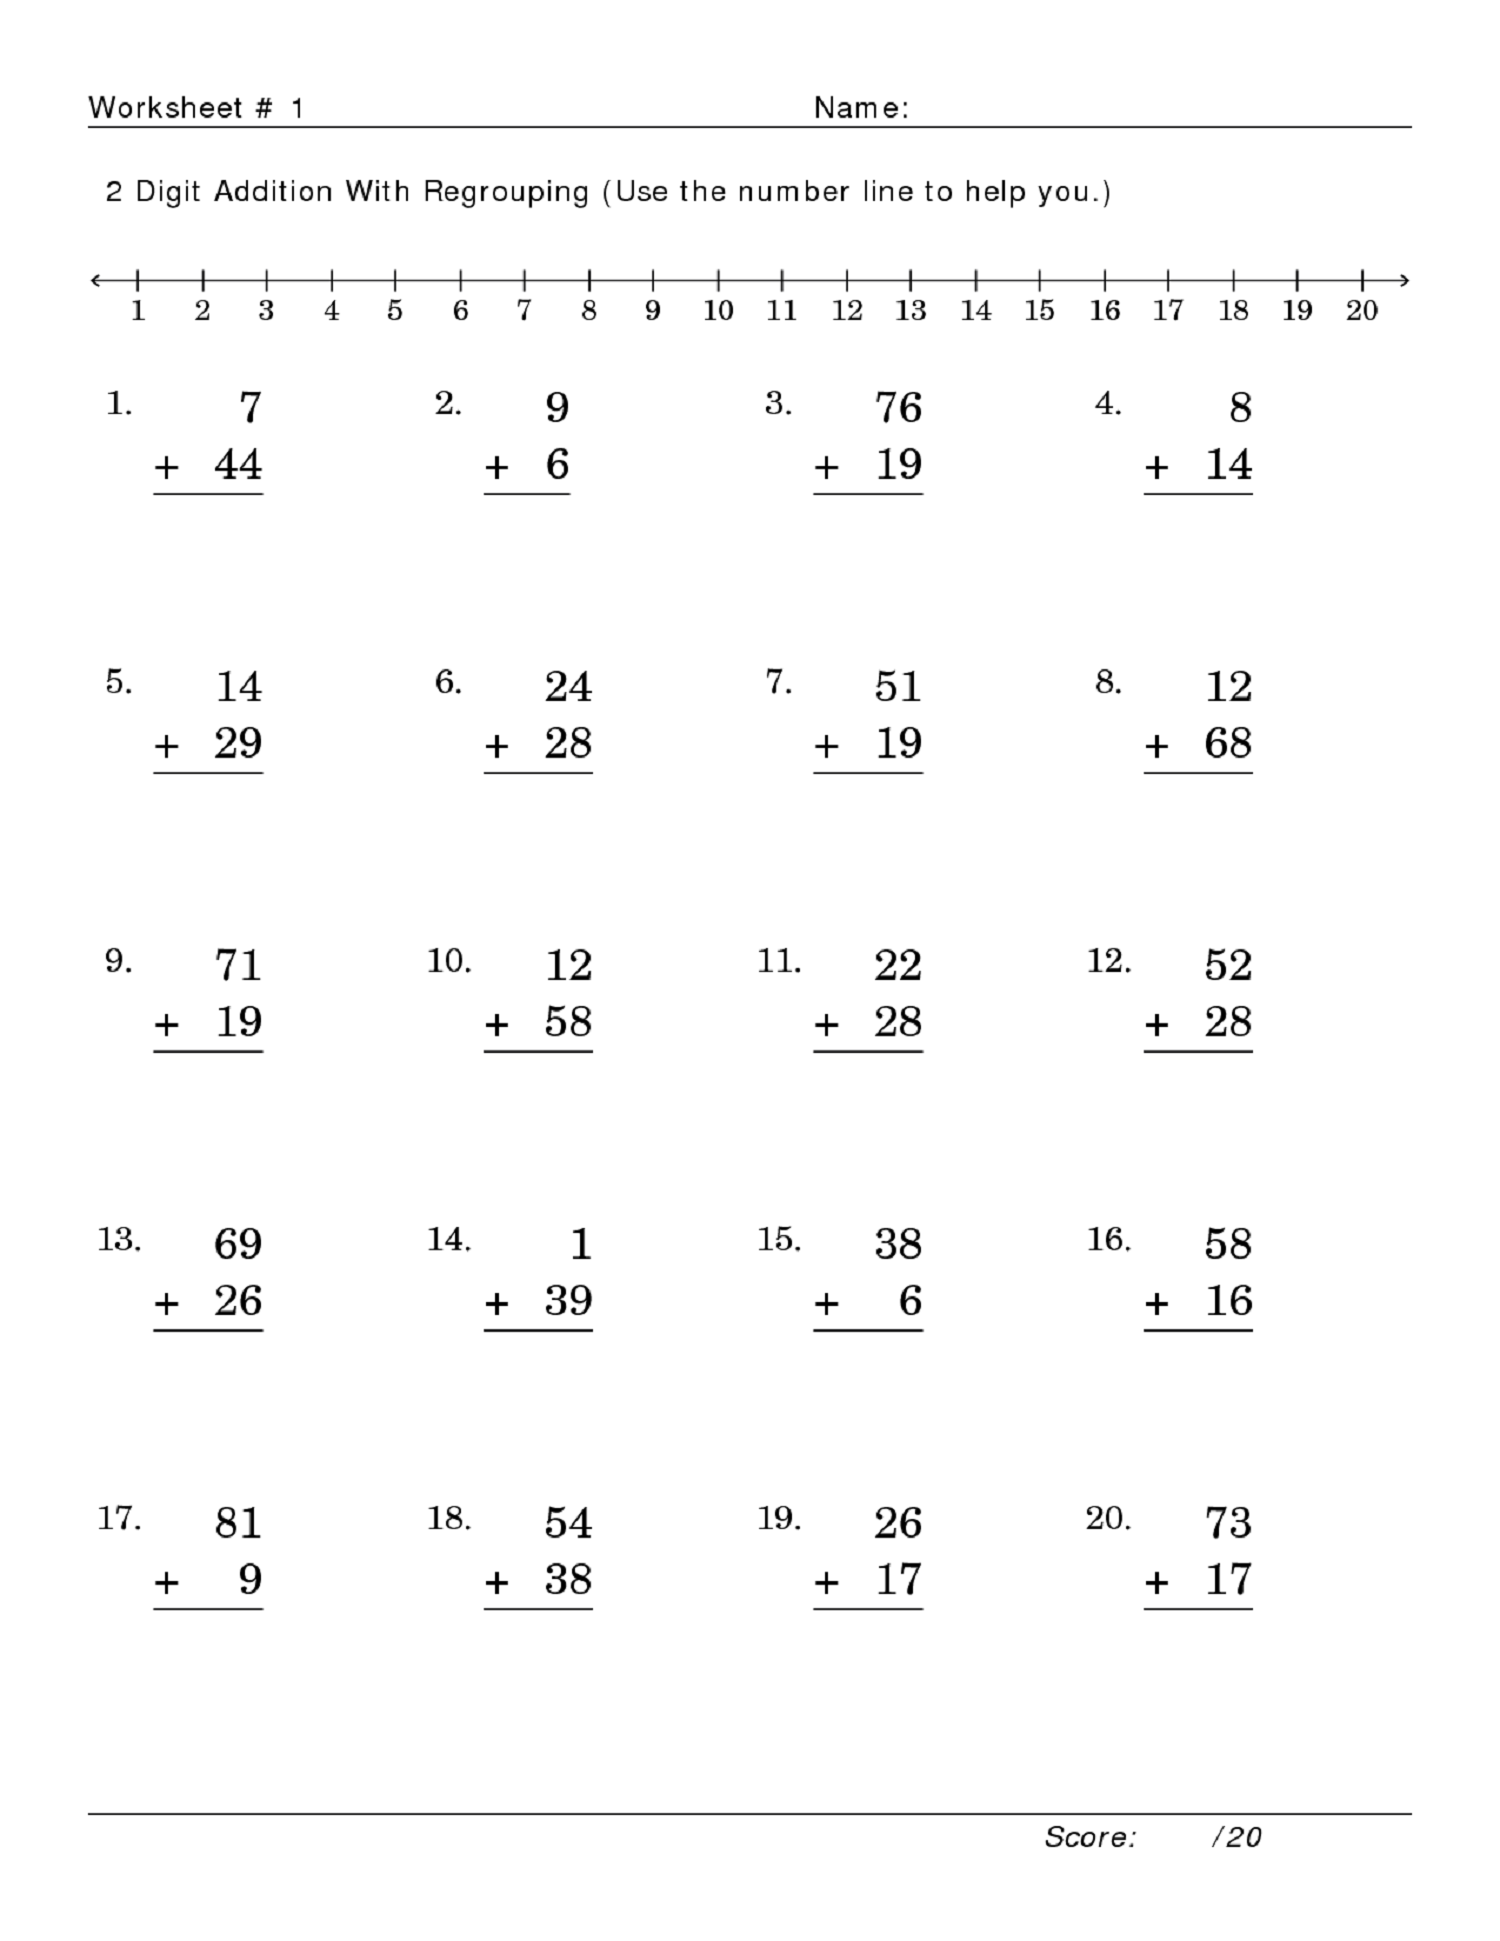 maths worksheets for grade 1 download here come new ideas for 1st grade worksheets worksheet hero for worksheets grade maths 1 download 